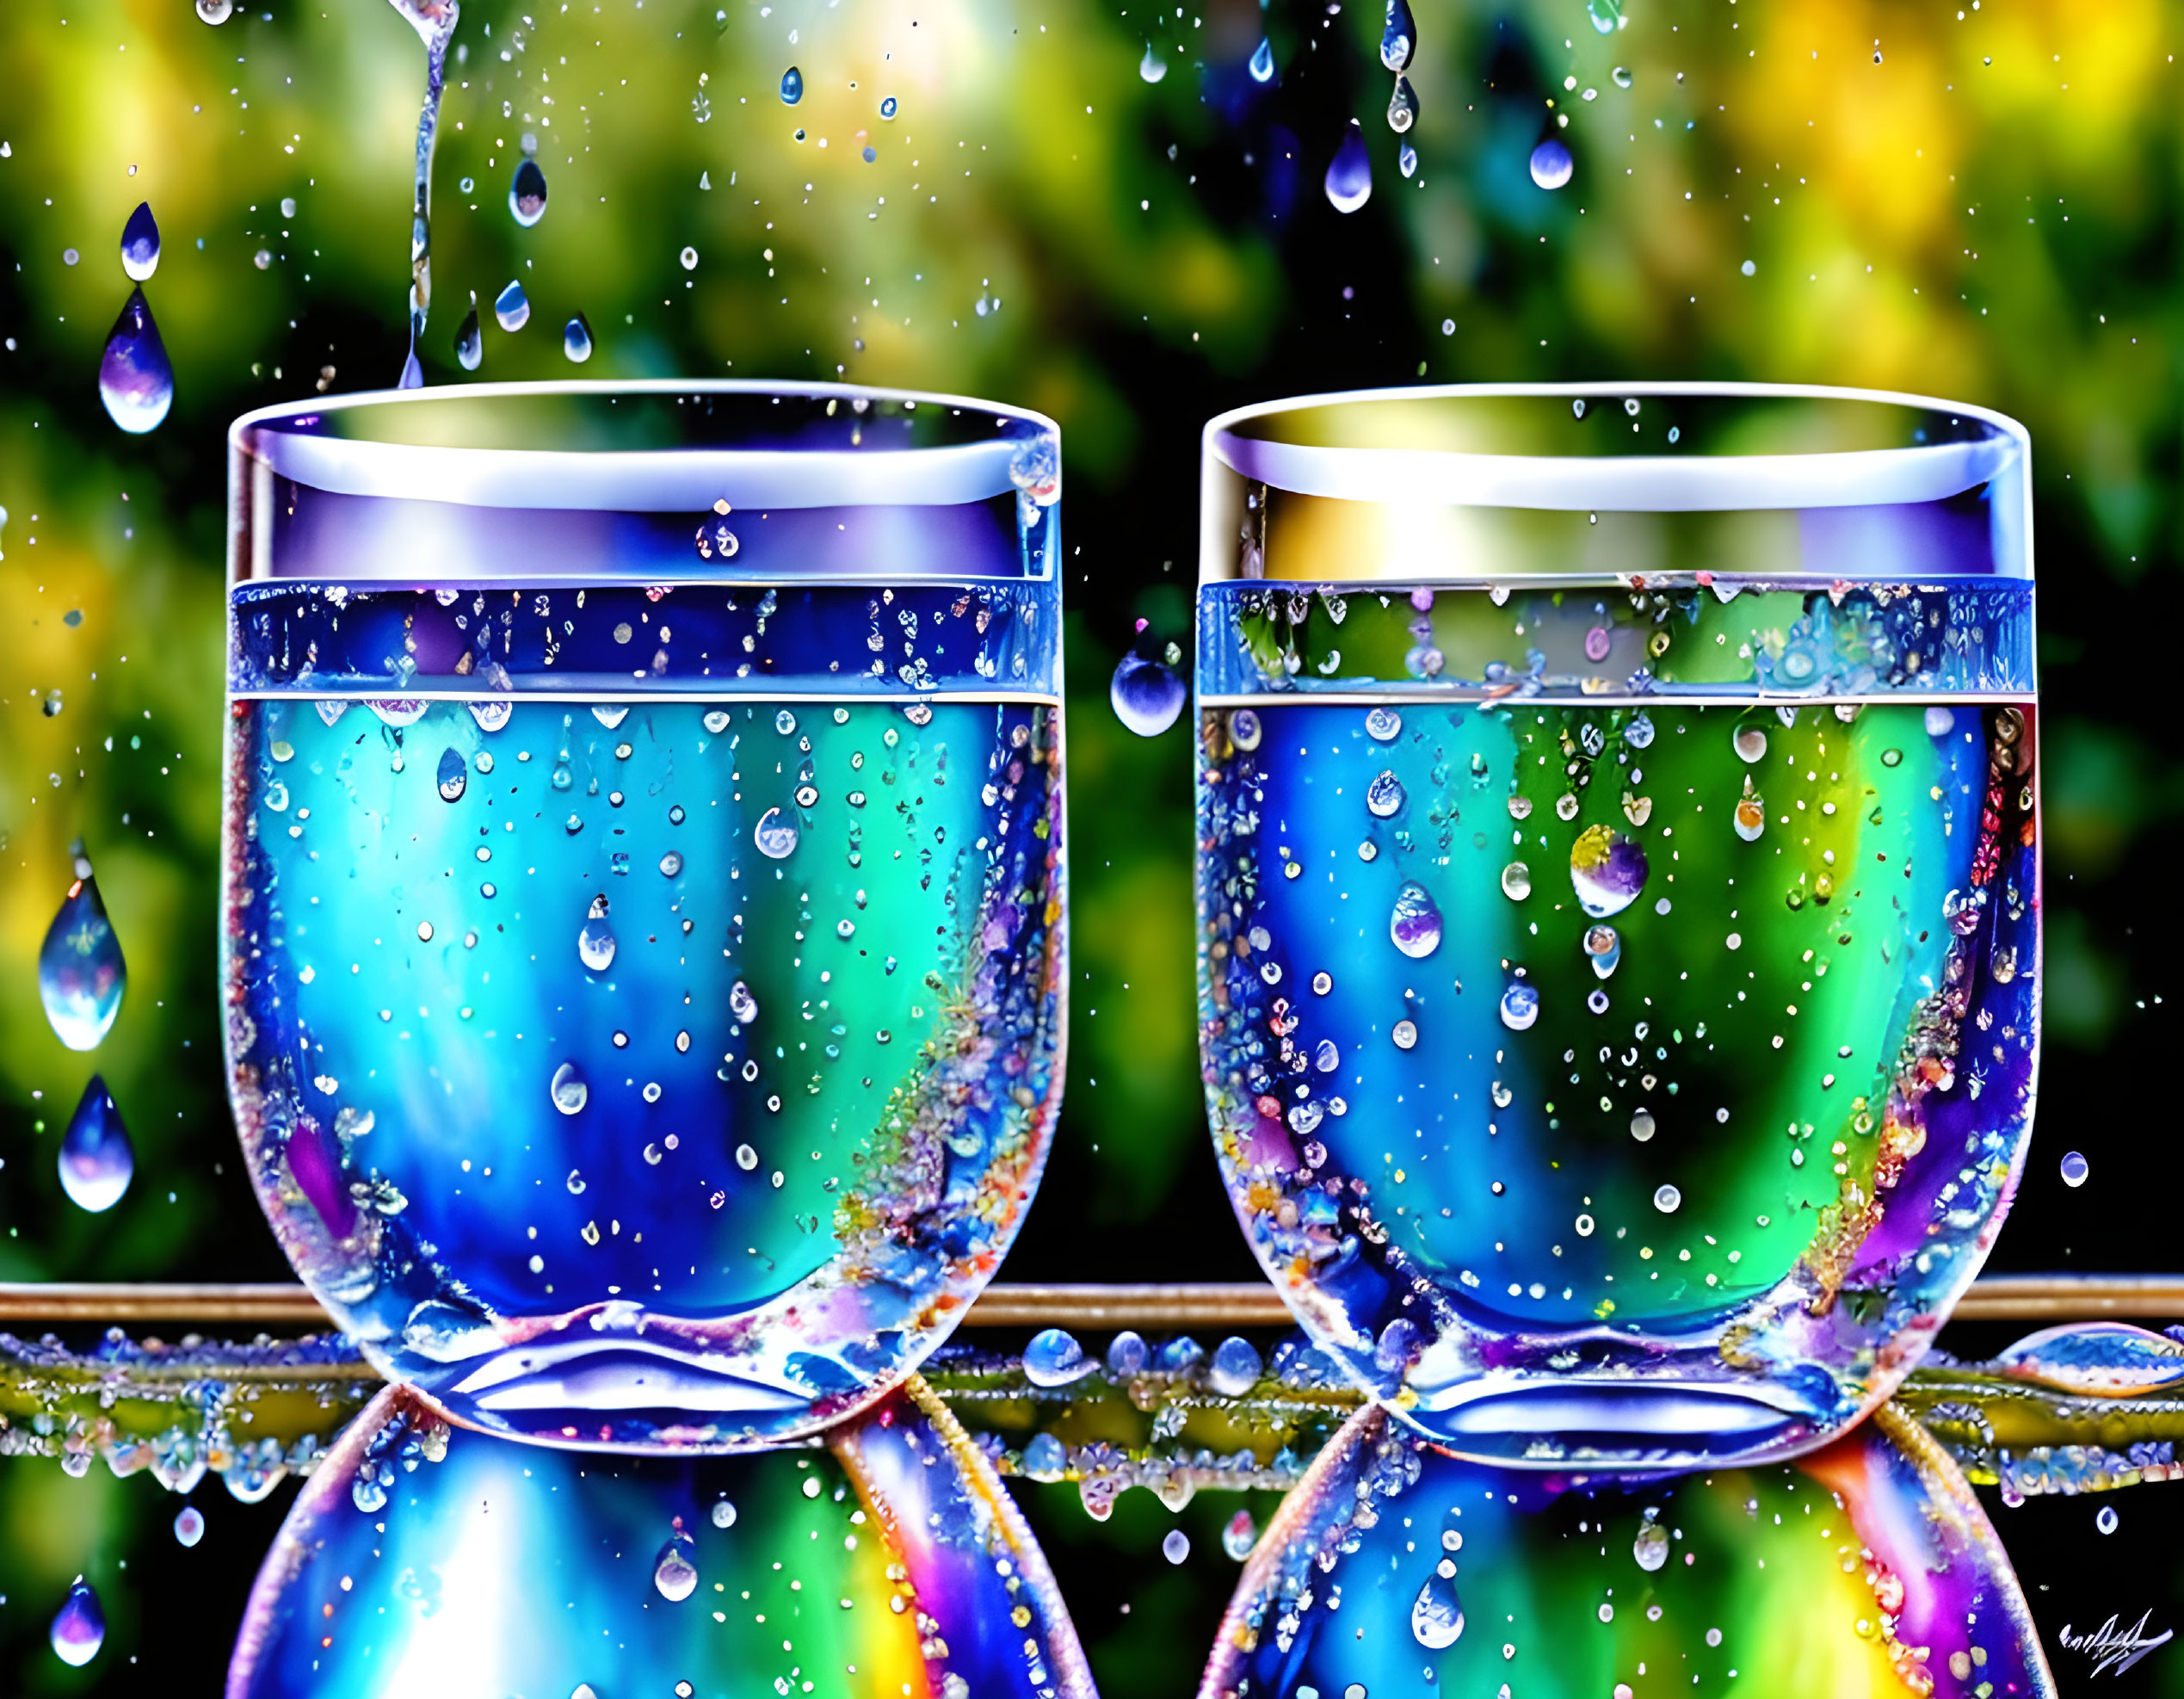 Blue liquid-filled clear glasses with water droplets and splashes on blurred green backdrop